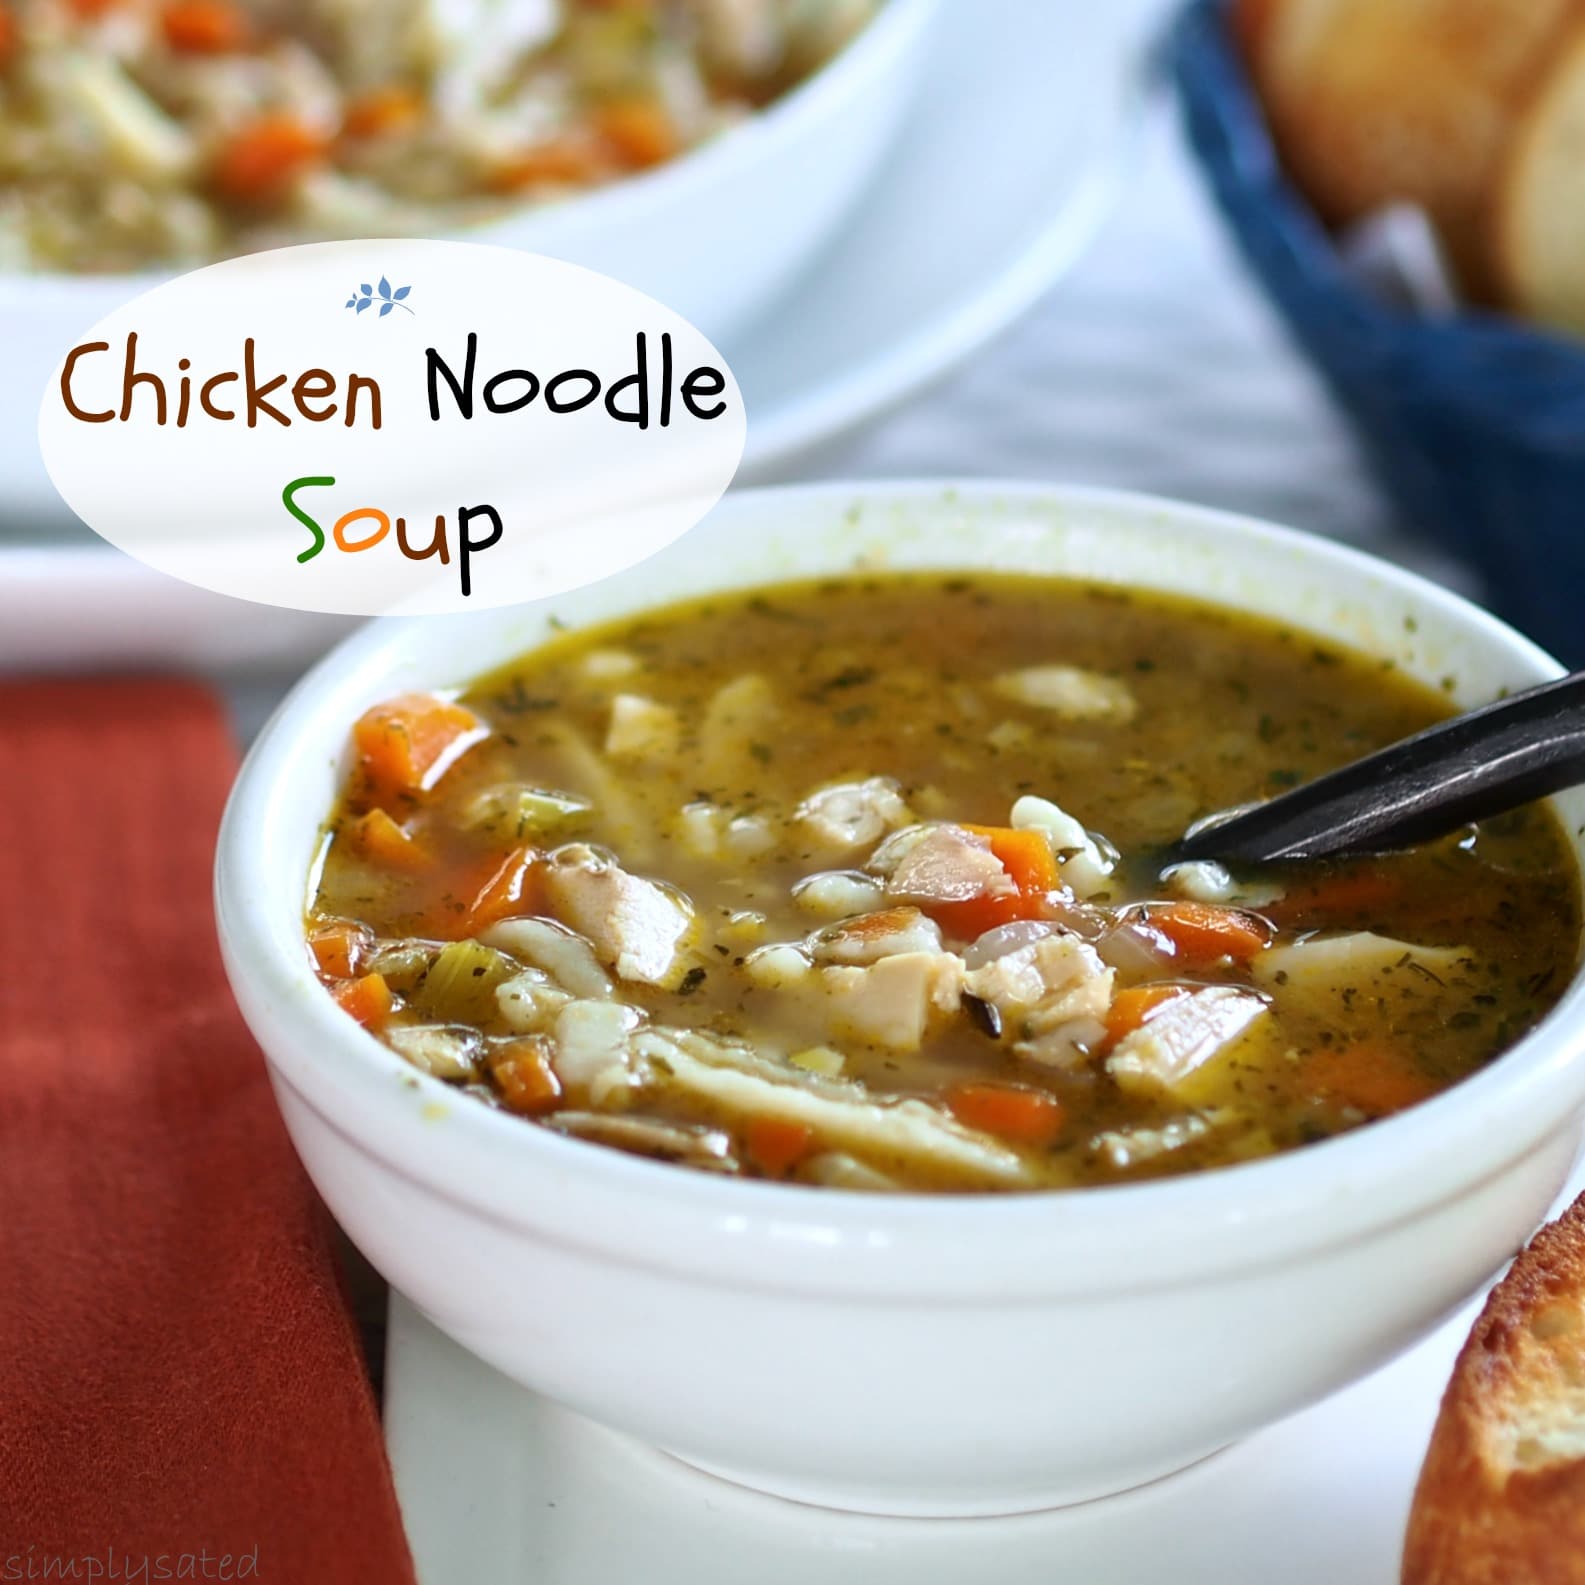 Chicken Noodle Soup is known to cure what ails you. No "spoonful of sugar" needed to help this soup go down. Simply Sated